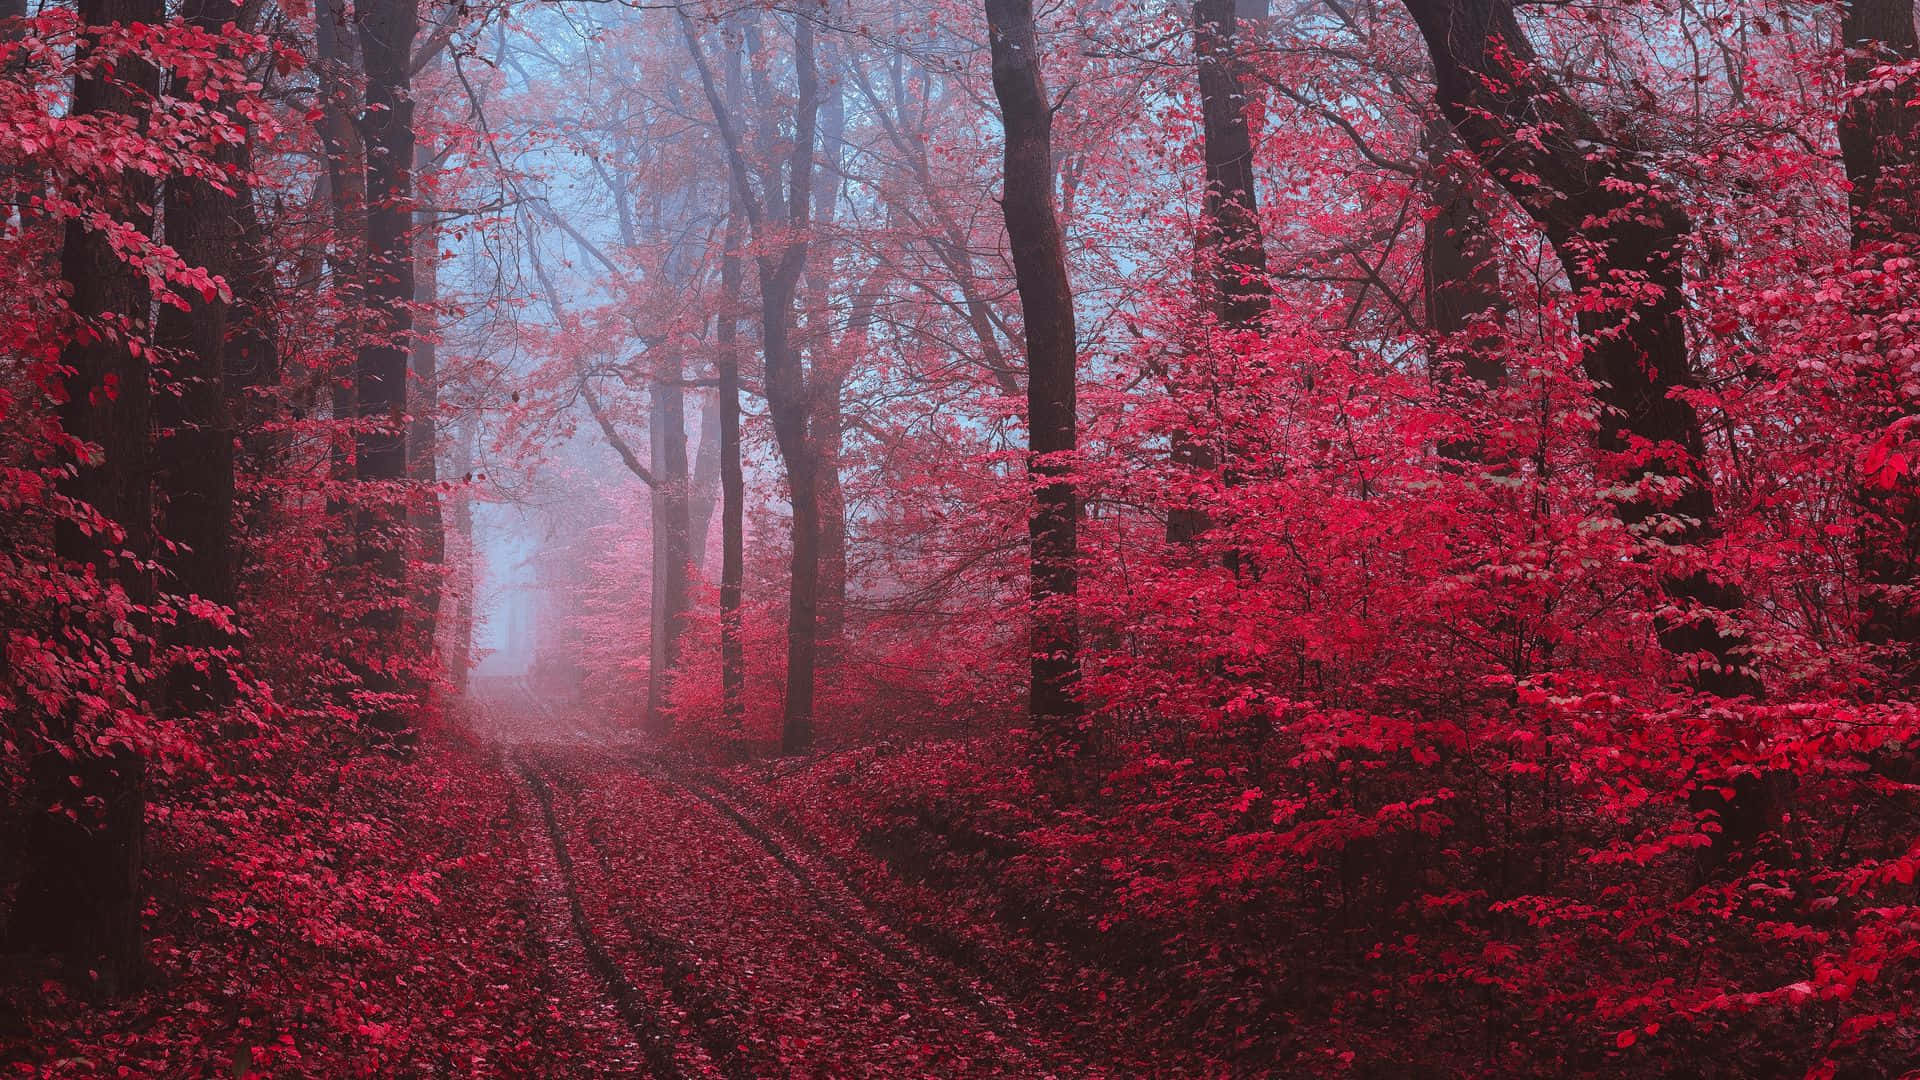 A tranquil red forest landscape in autumn Wallpaper